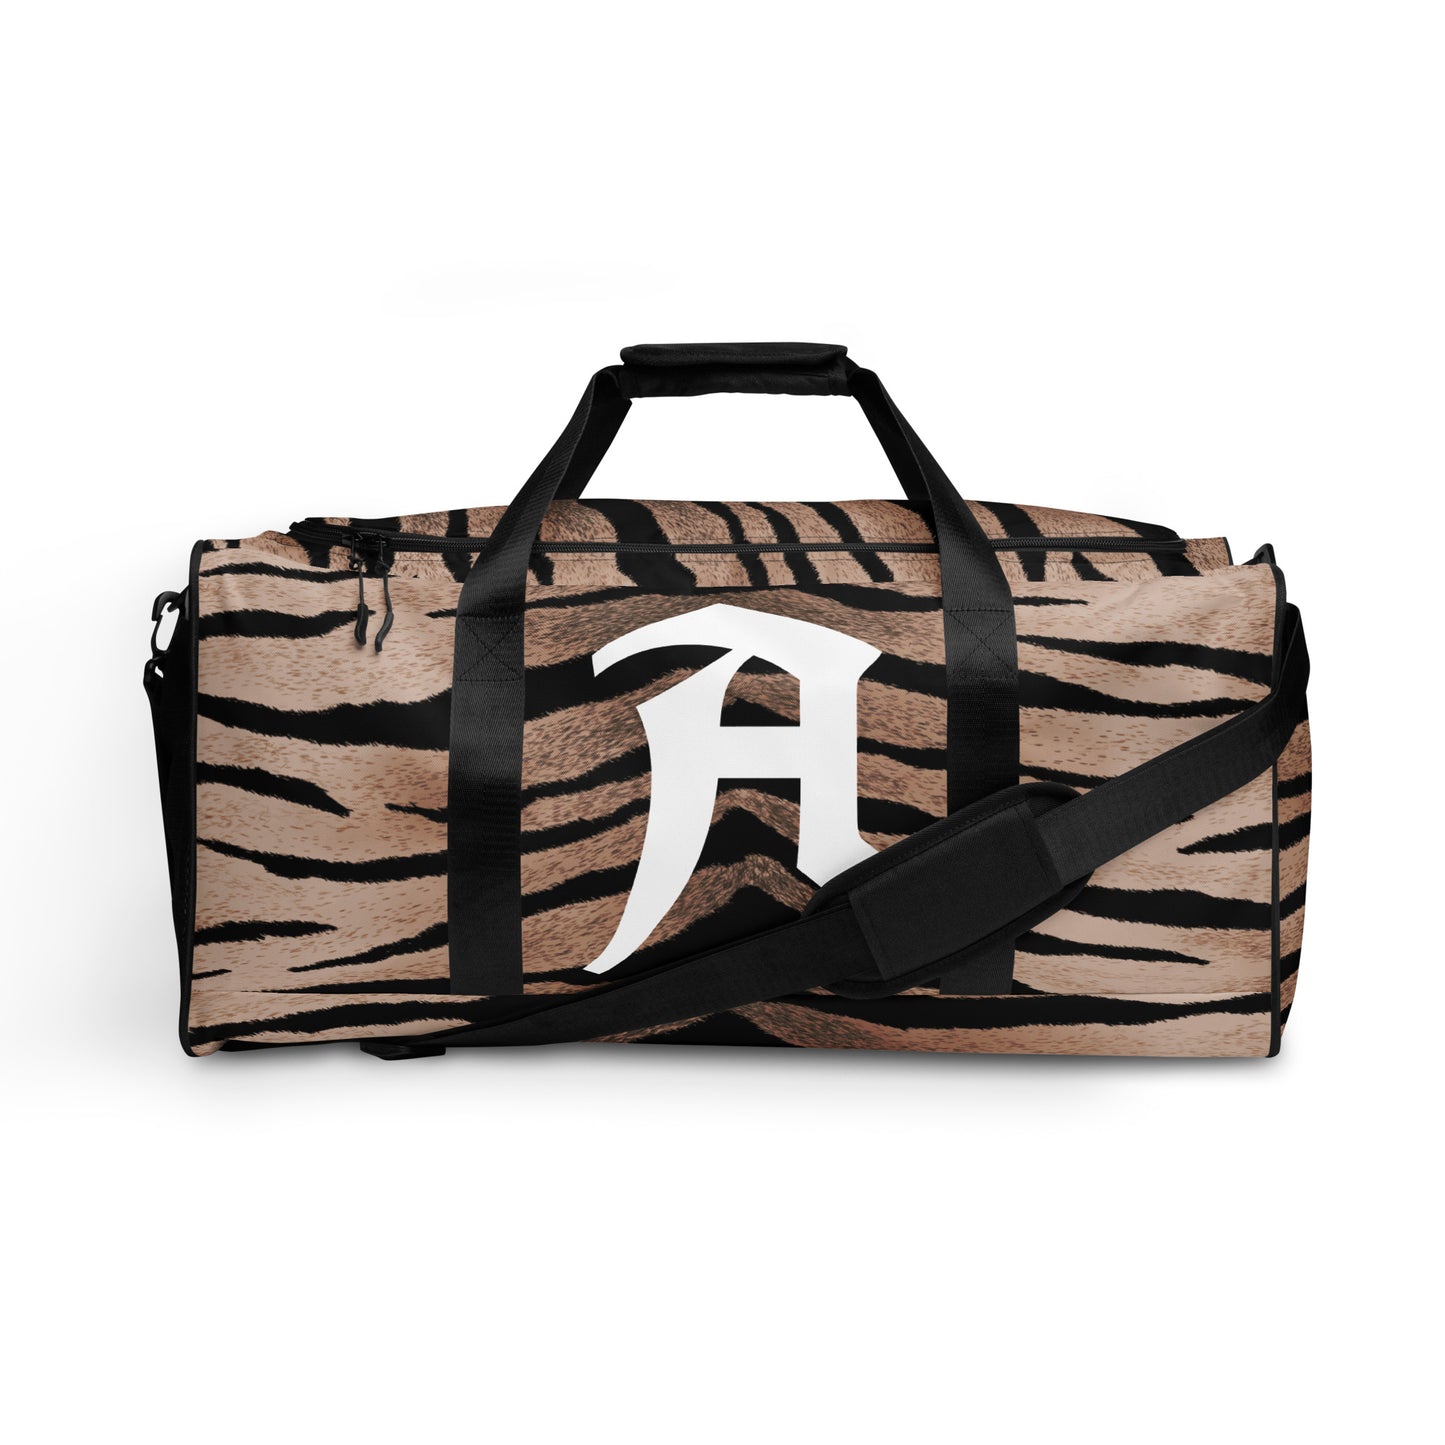 Personalized Monogrammed  Duffle Bag in Tiger Design